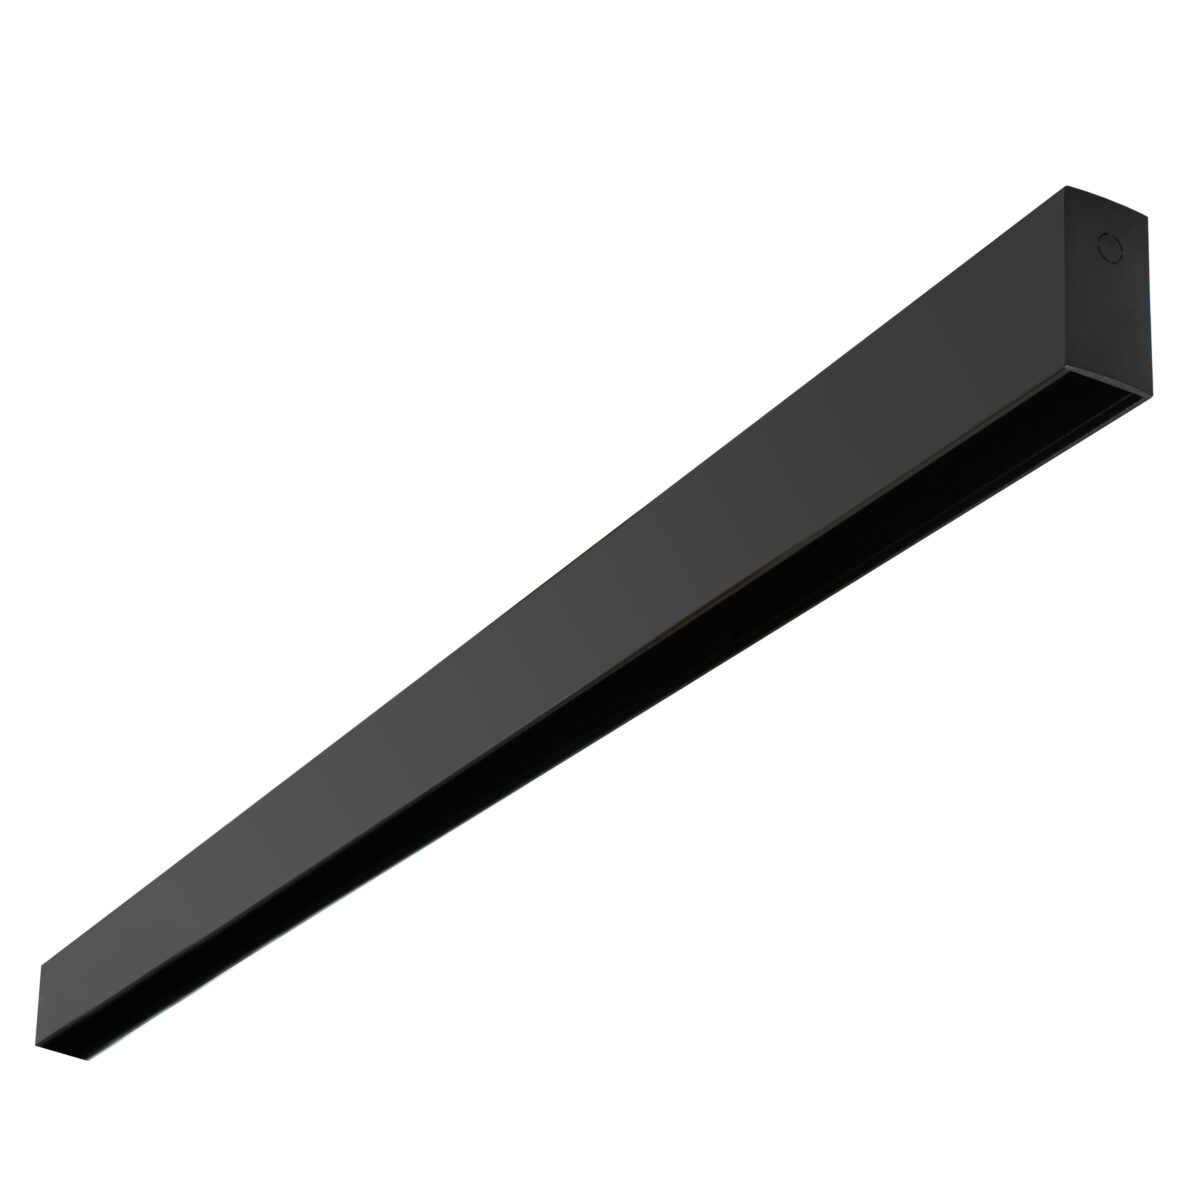 MAGNETIC TRACK superficie Carril negro 2m